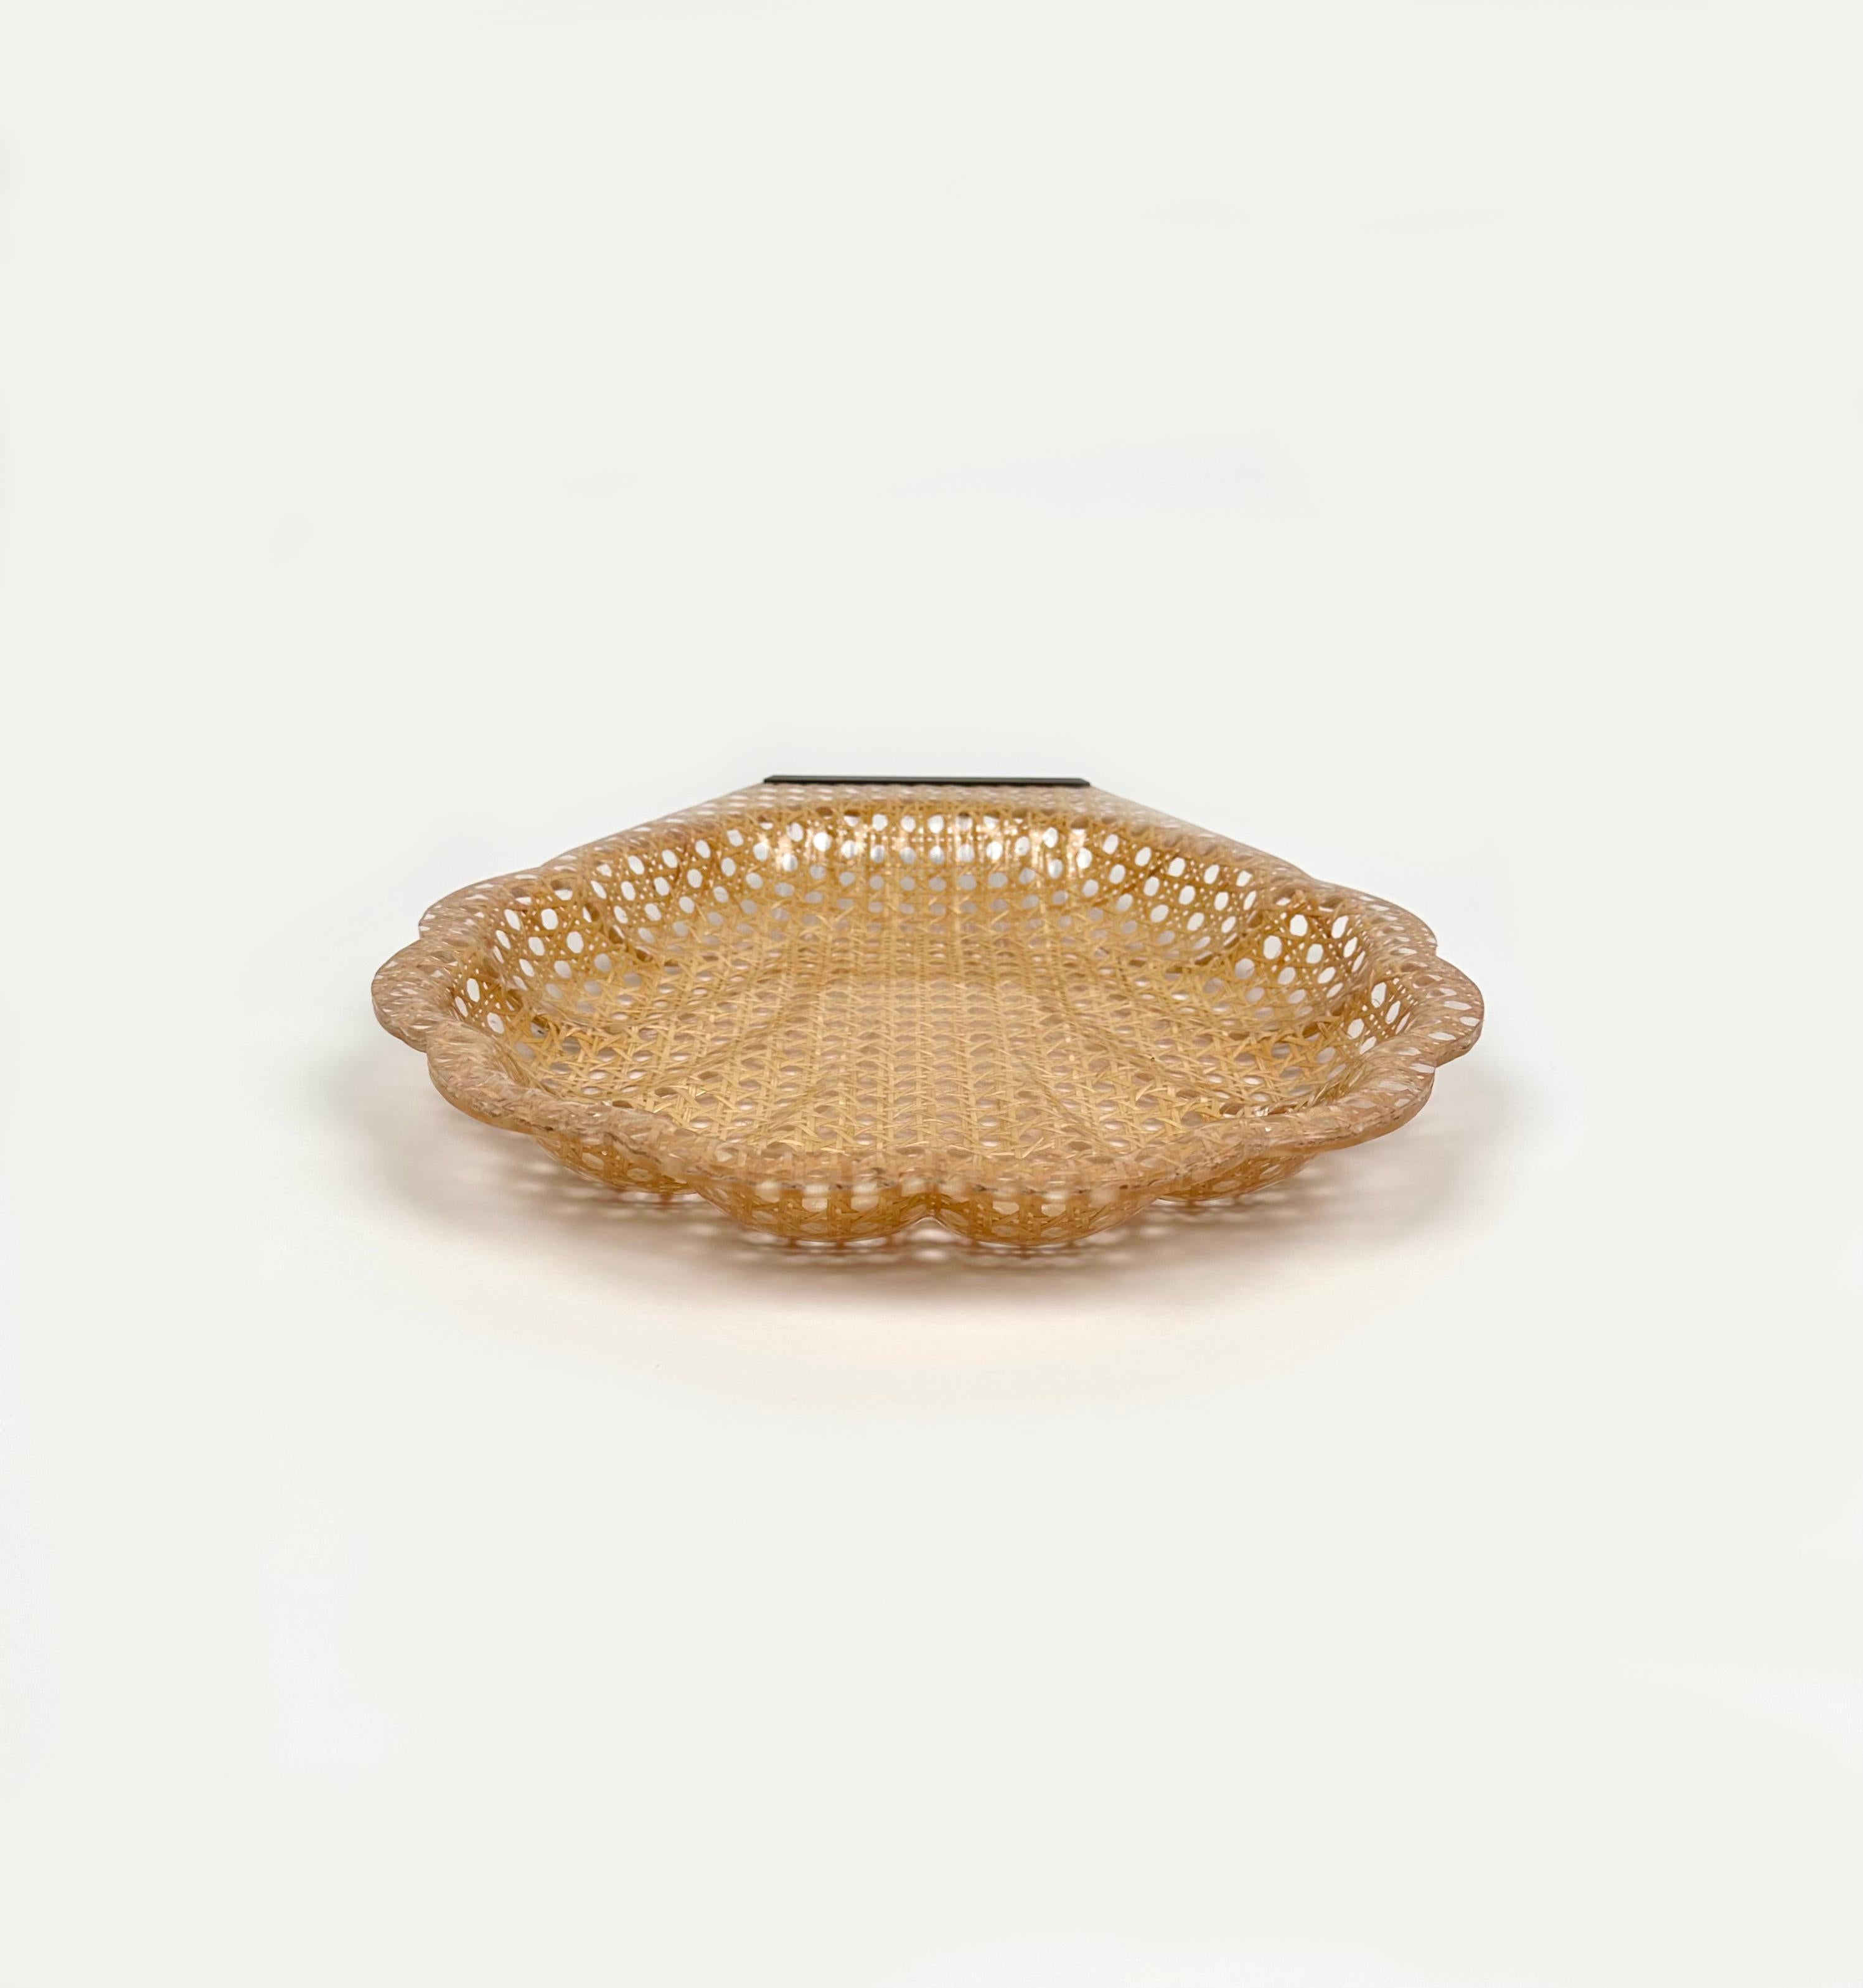 Late 20th Century Shell Serving Tray Lucite and Rattan Christian Dior Style, France, 1970s